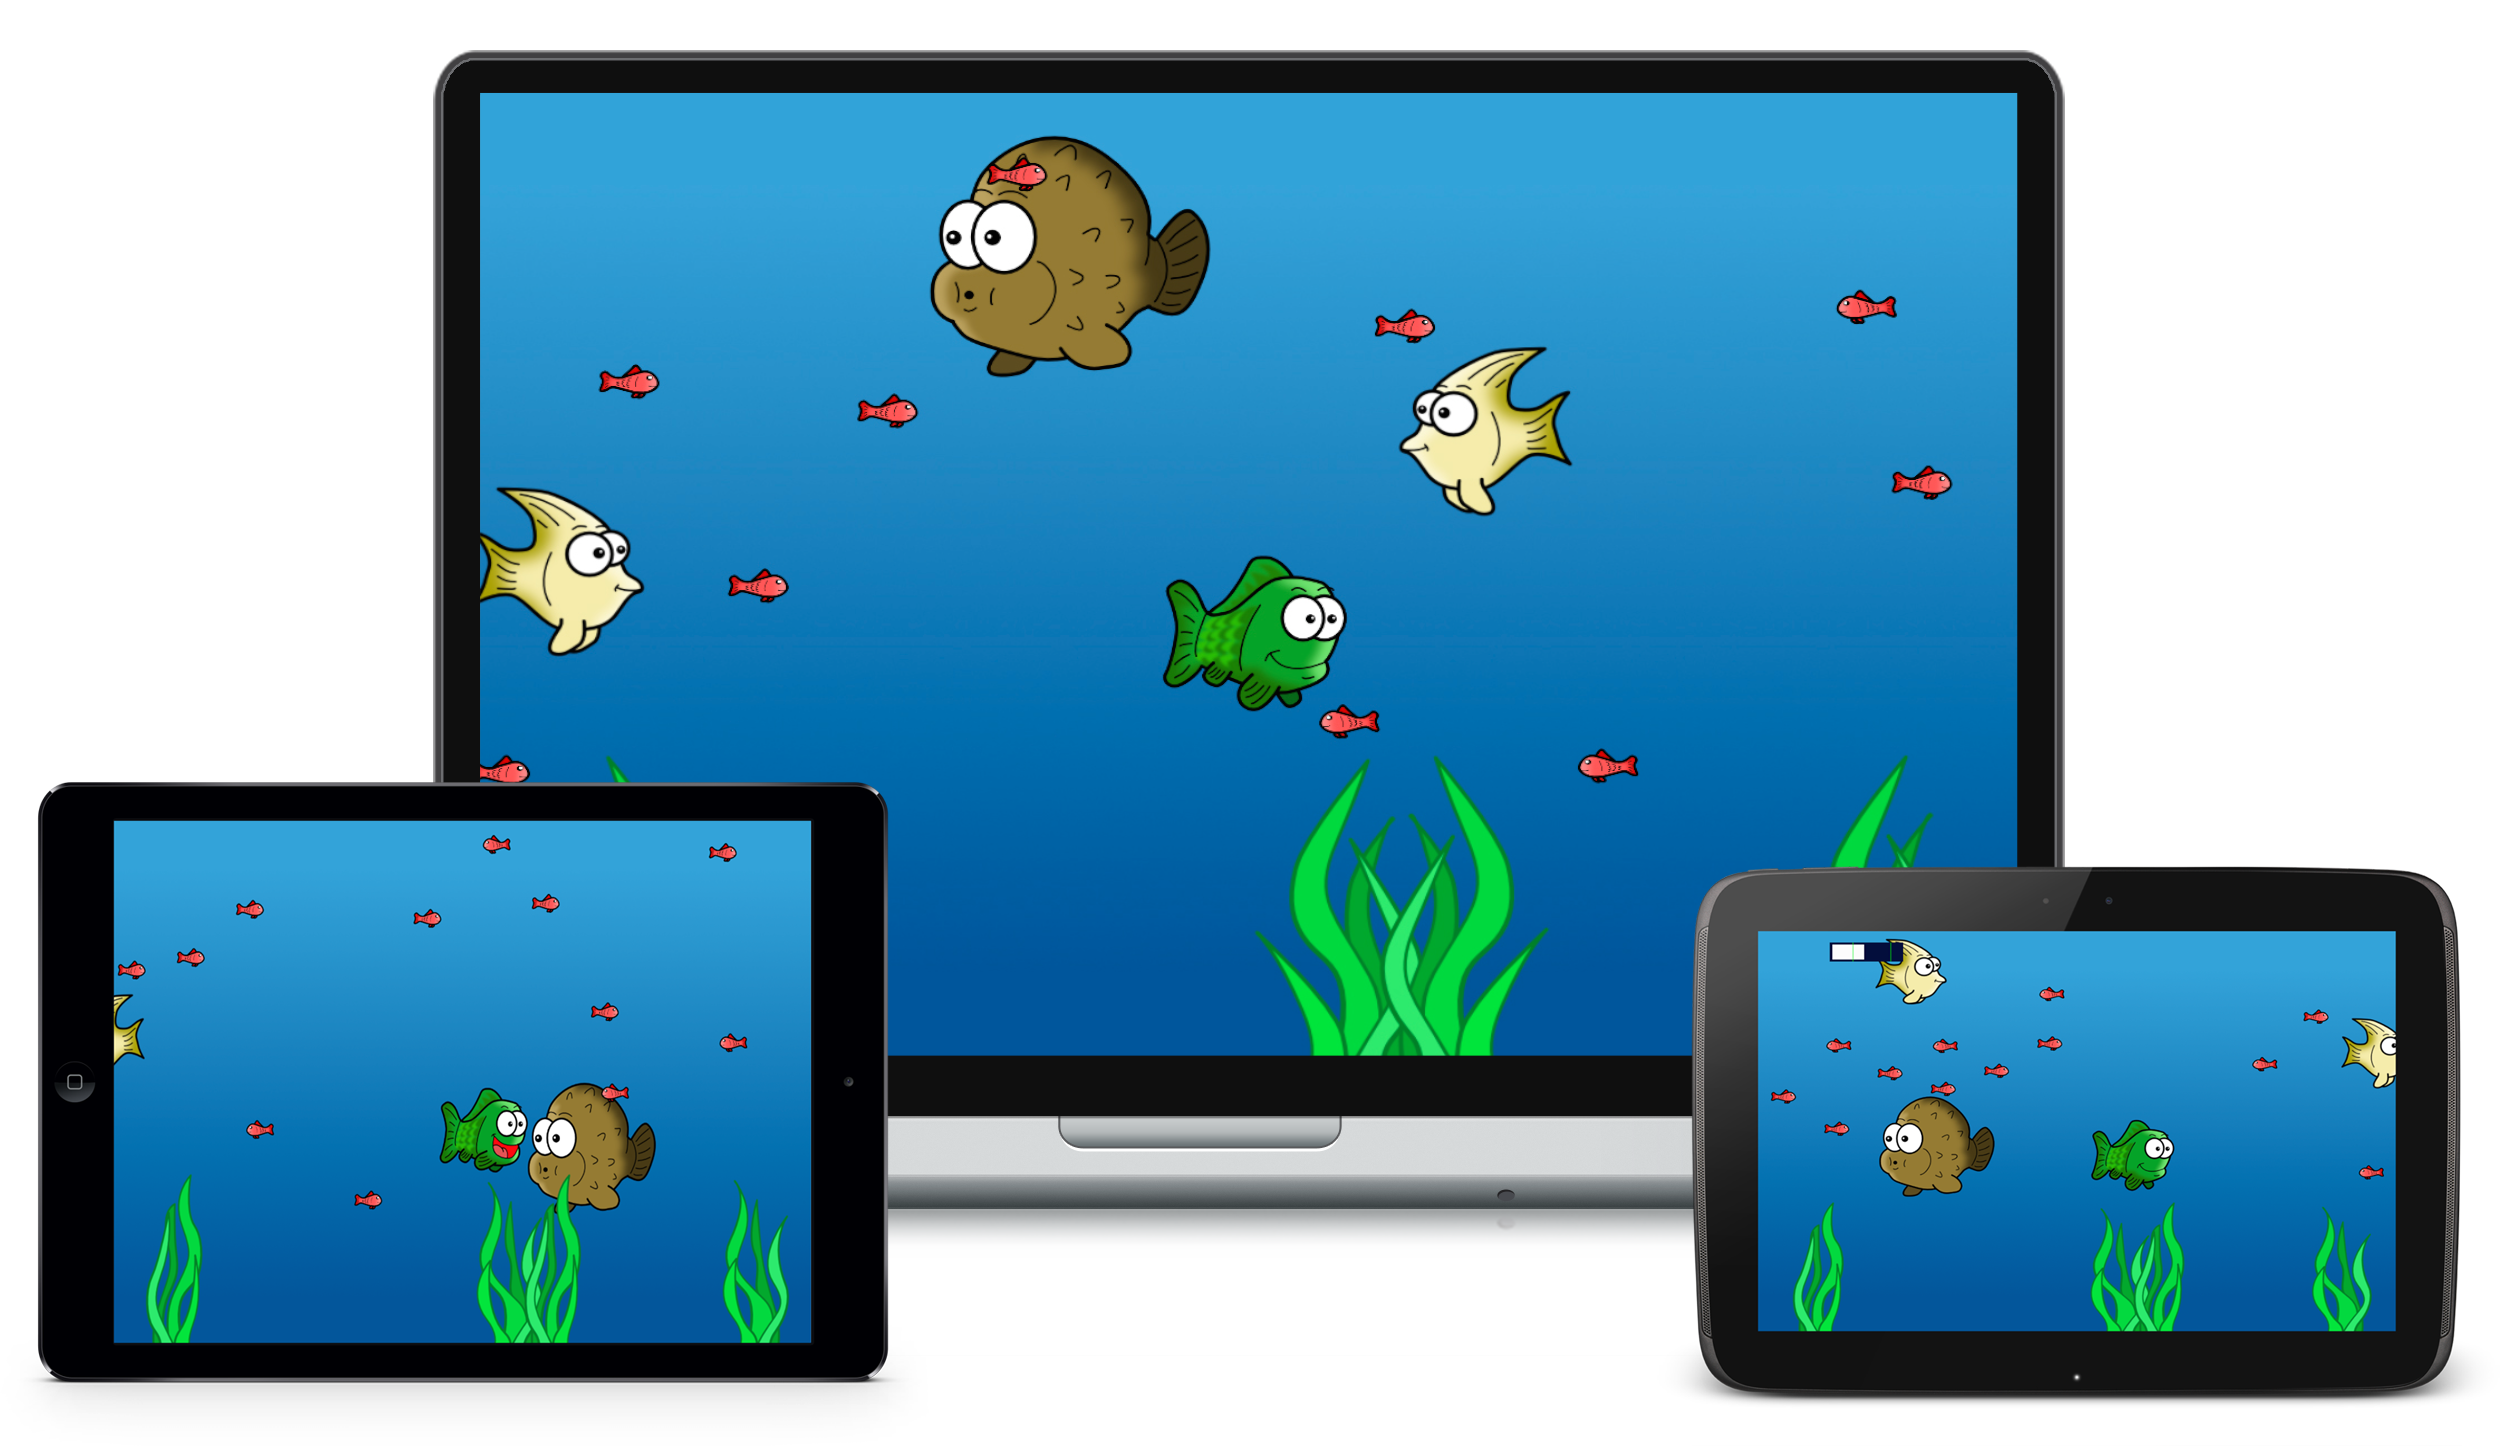 Create Fish Frenzy Game in Construct 2 Tutorial